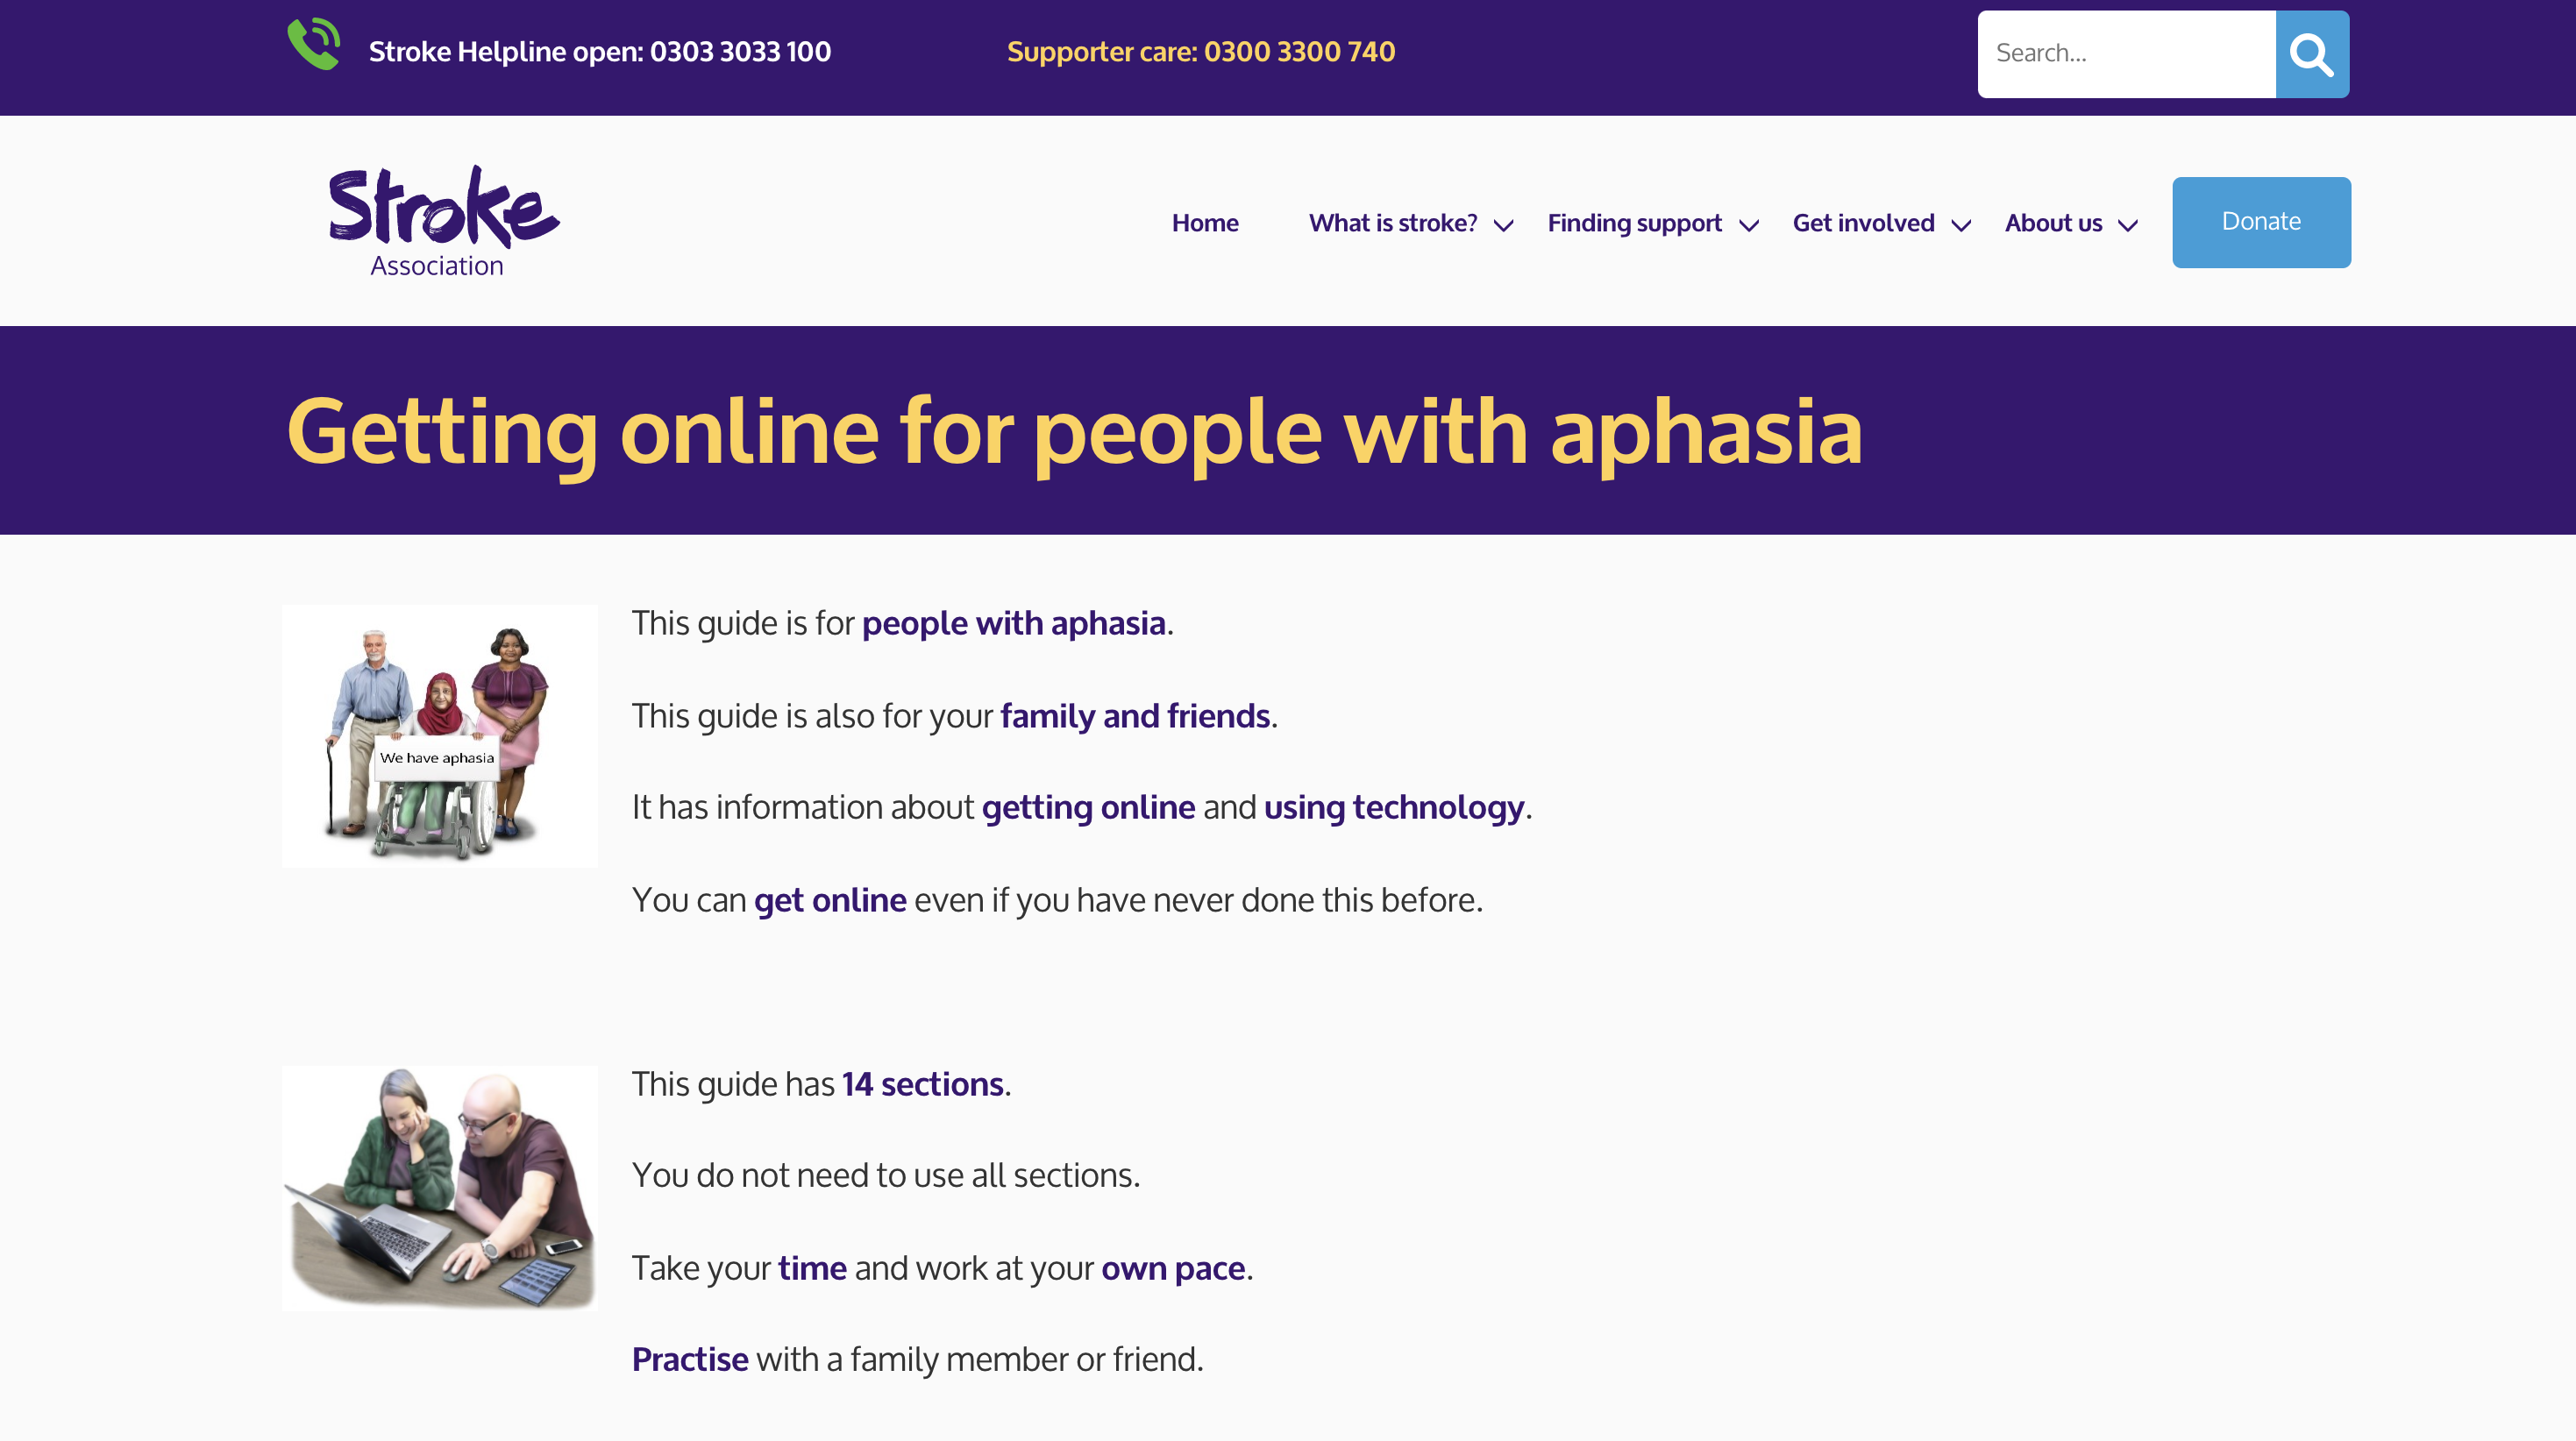 A picture of the Getting online for people with aphasia guide